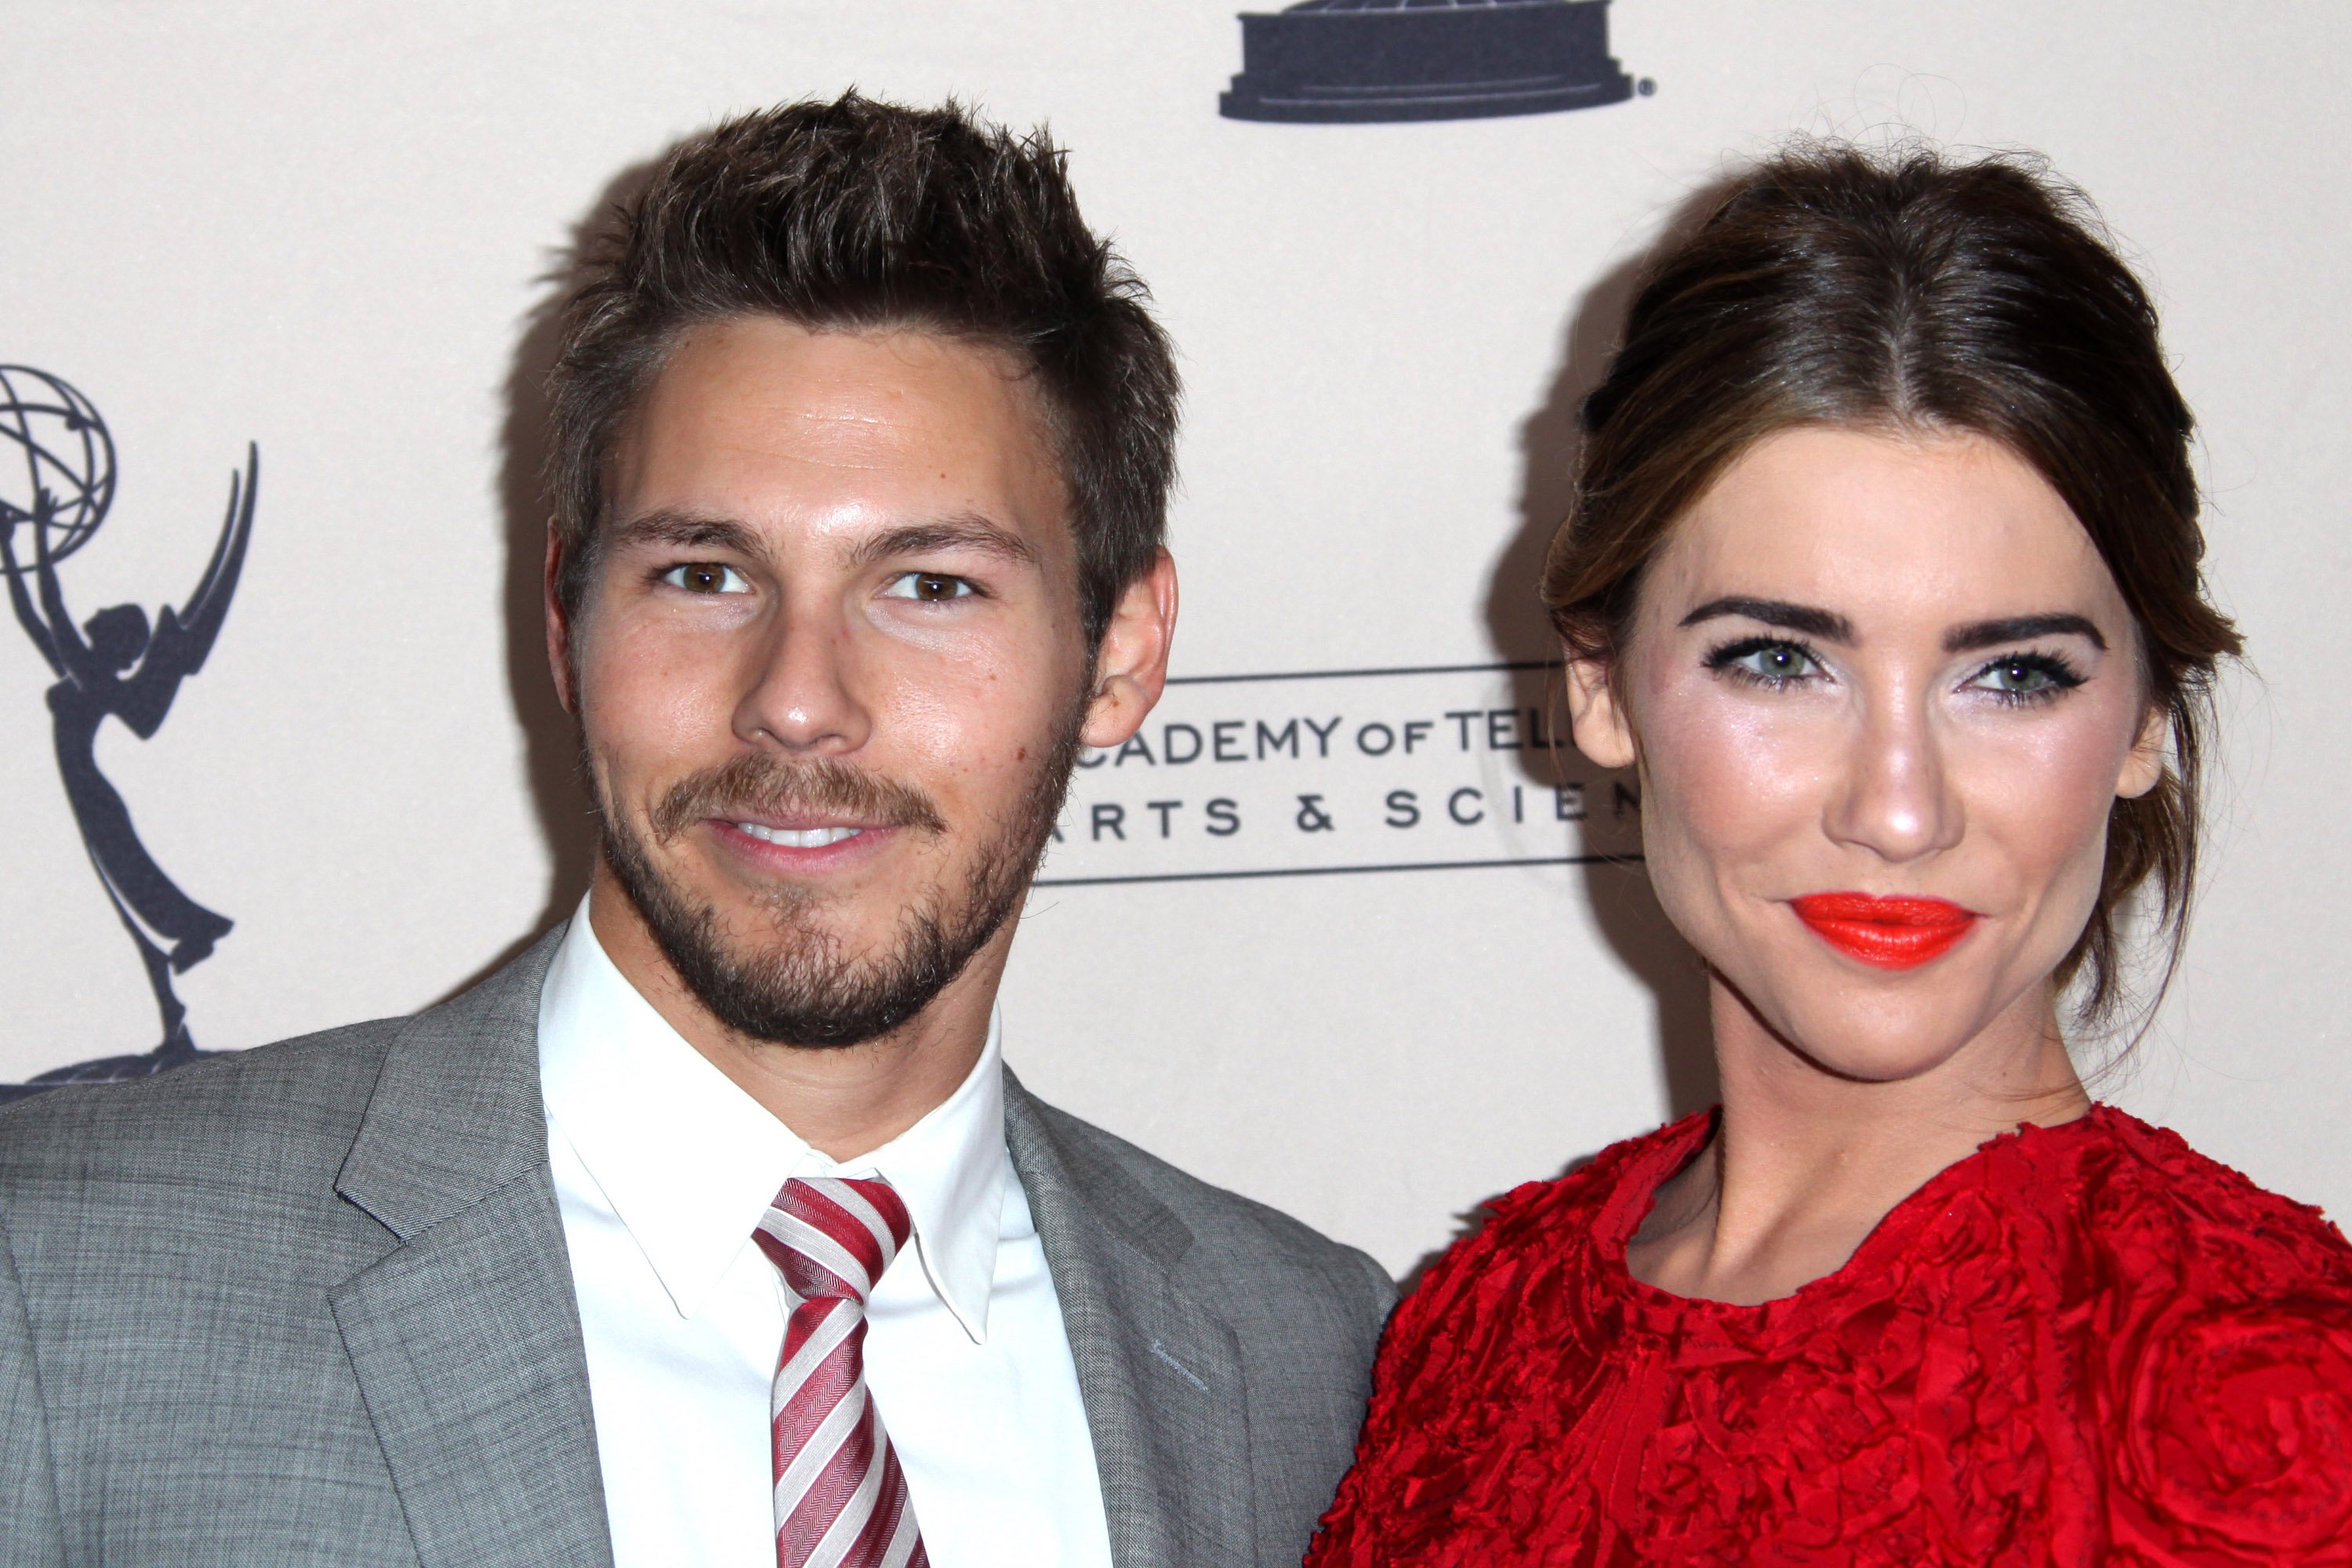 'The Bold and the Beautiful' actor Scott Clifton in a grey suit and Jacqueline MacInnes Wood in a red dress pose for a photo together.